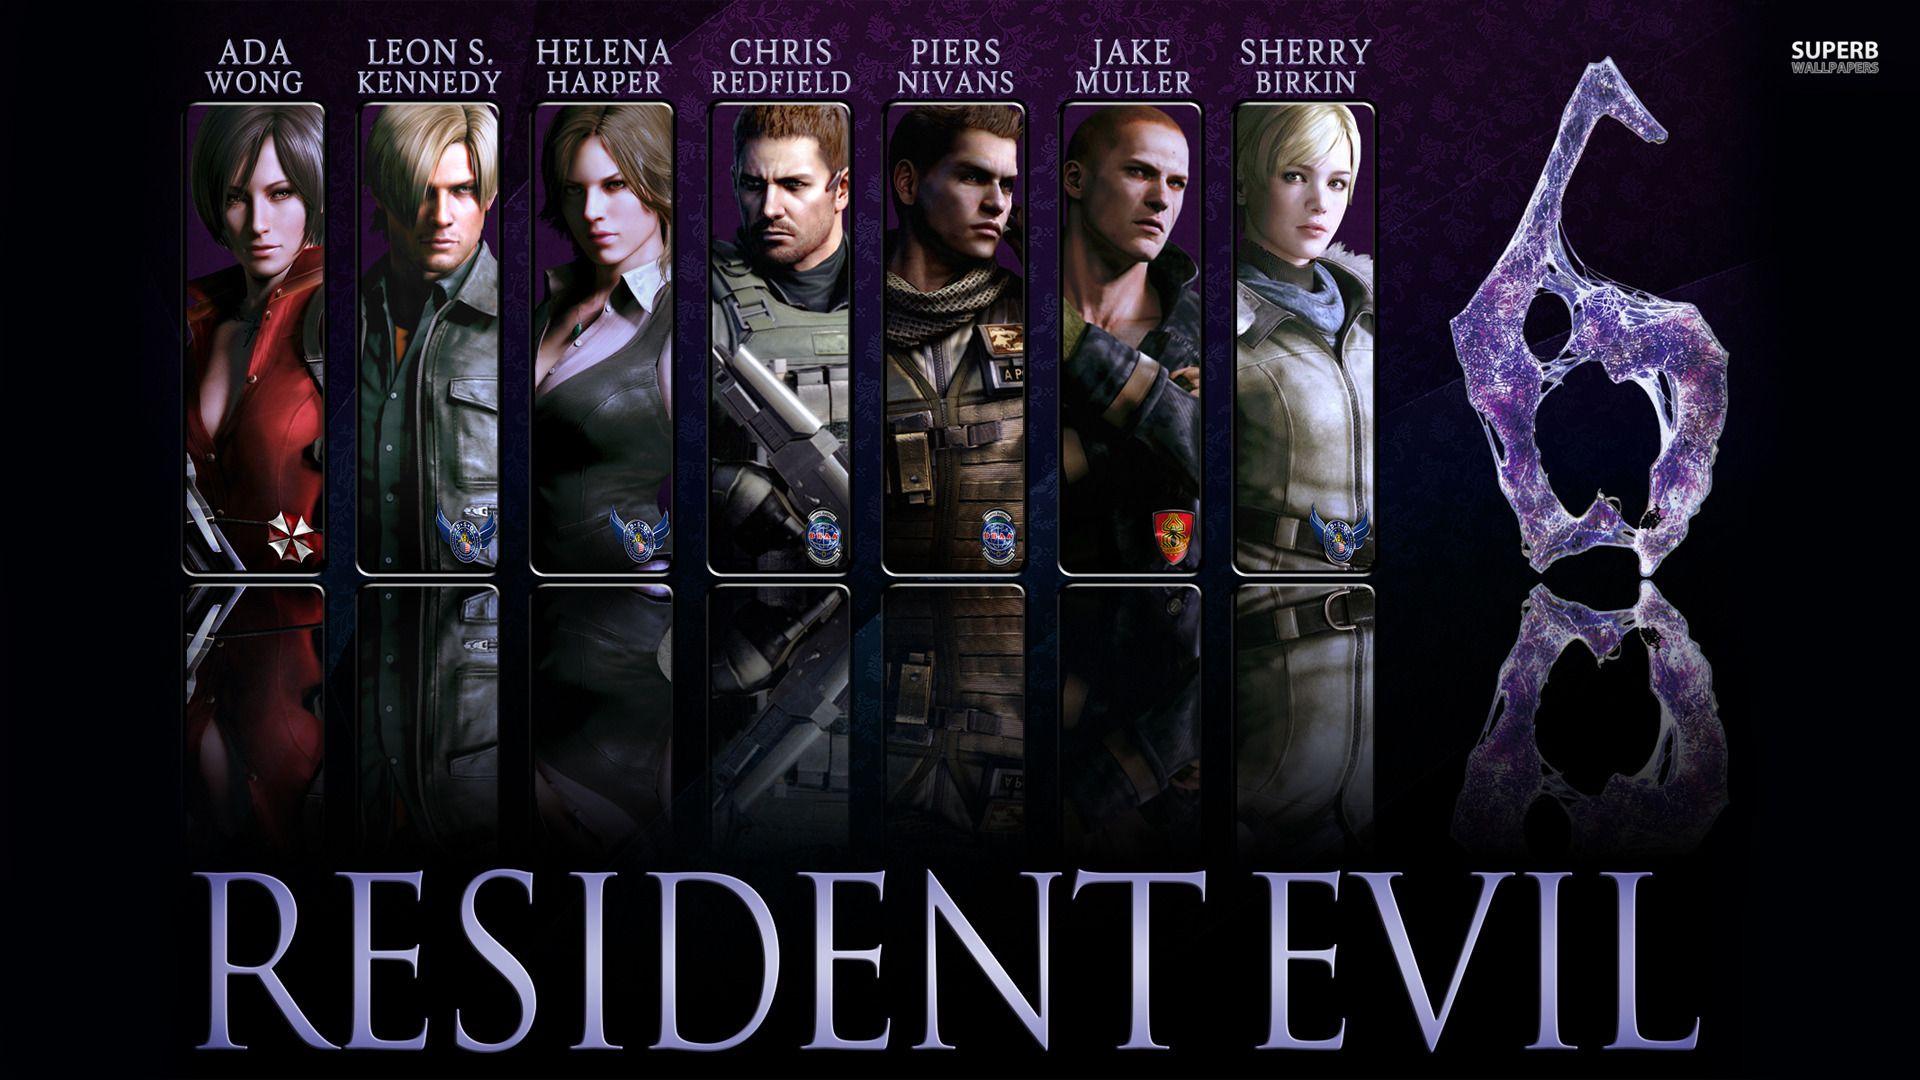 RESIDENT EVIL REVALATIONS. nice and HD wallpaper, music, games etc